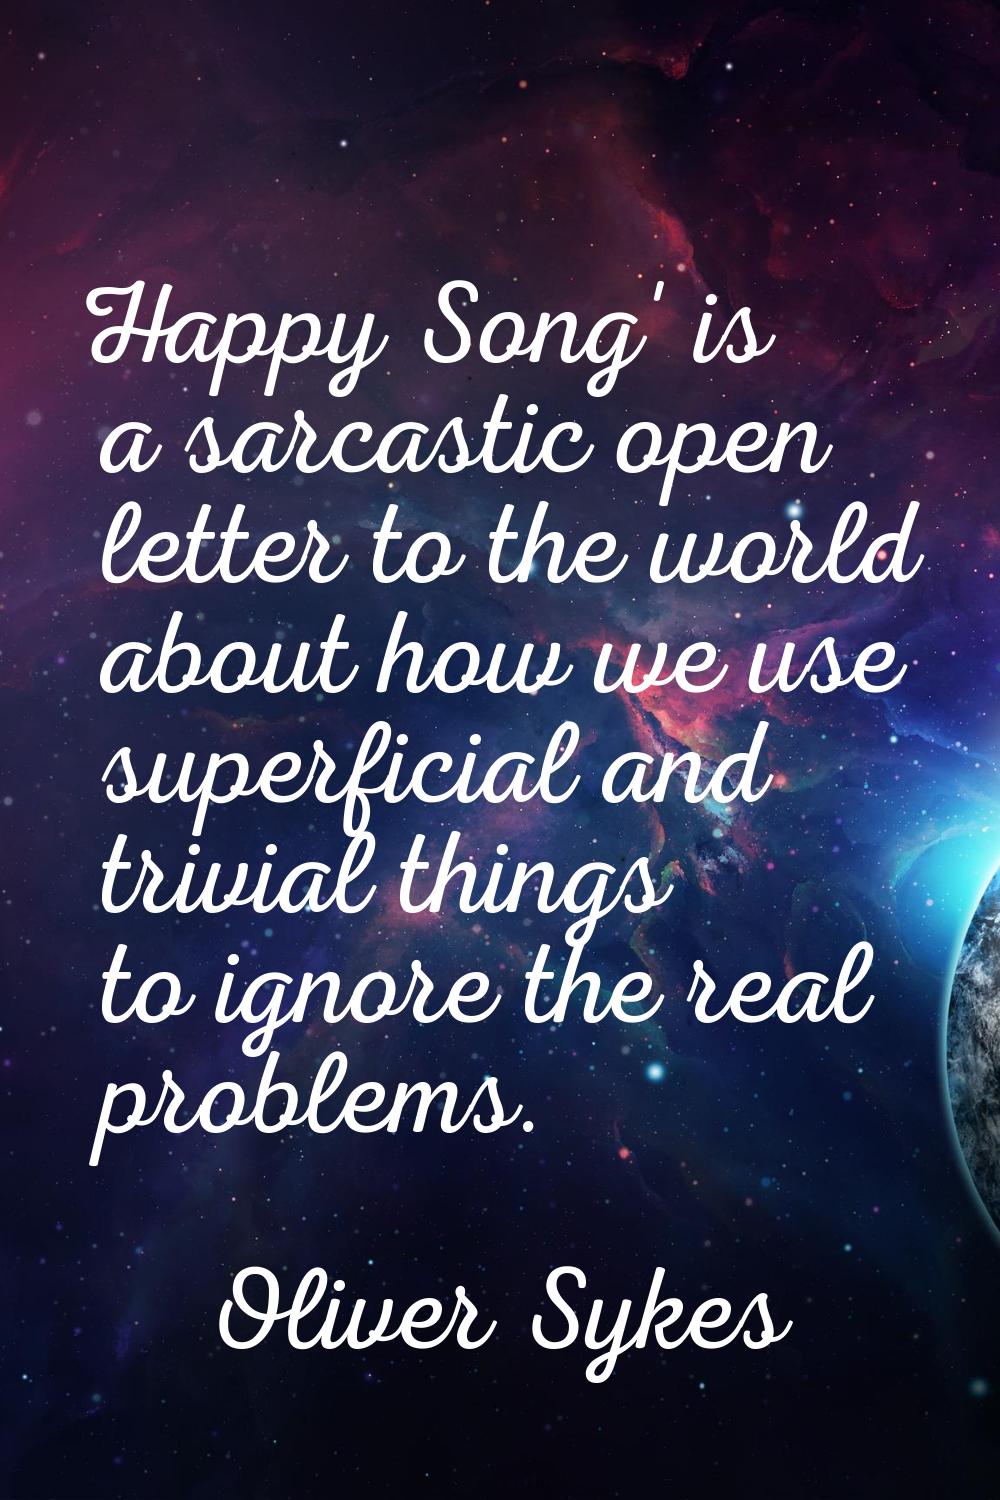 Happy Song' is a sarcastic open letter to the world about how we use superficial and trivial things